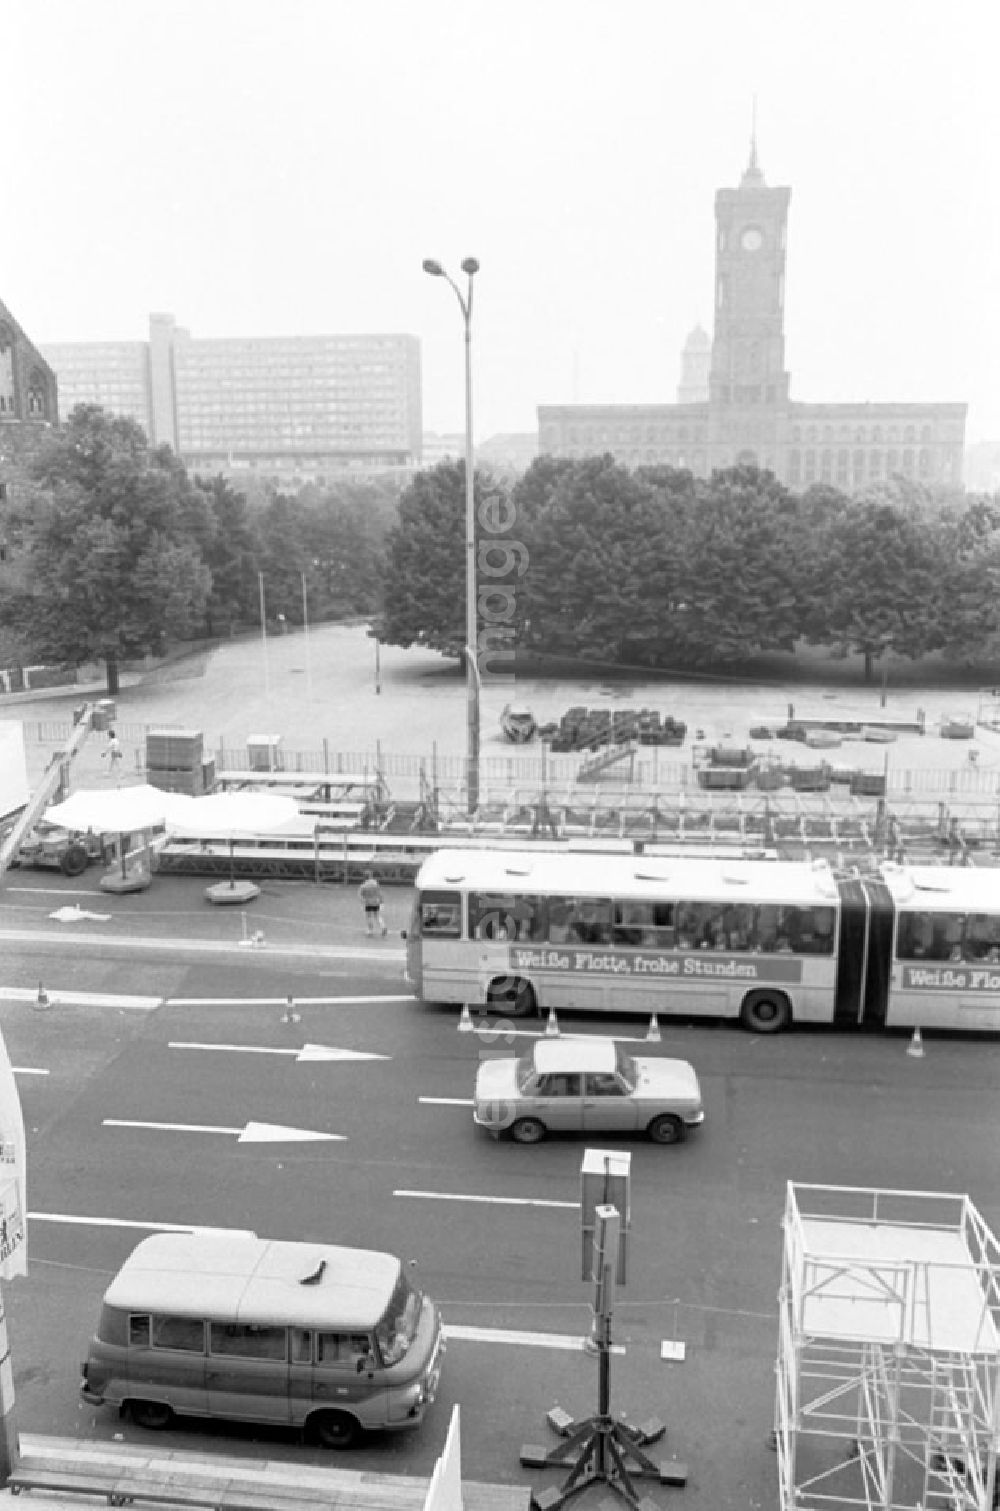 GDR image archive: Berlin - Mitte - 01.